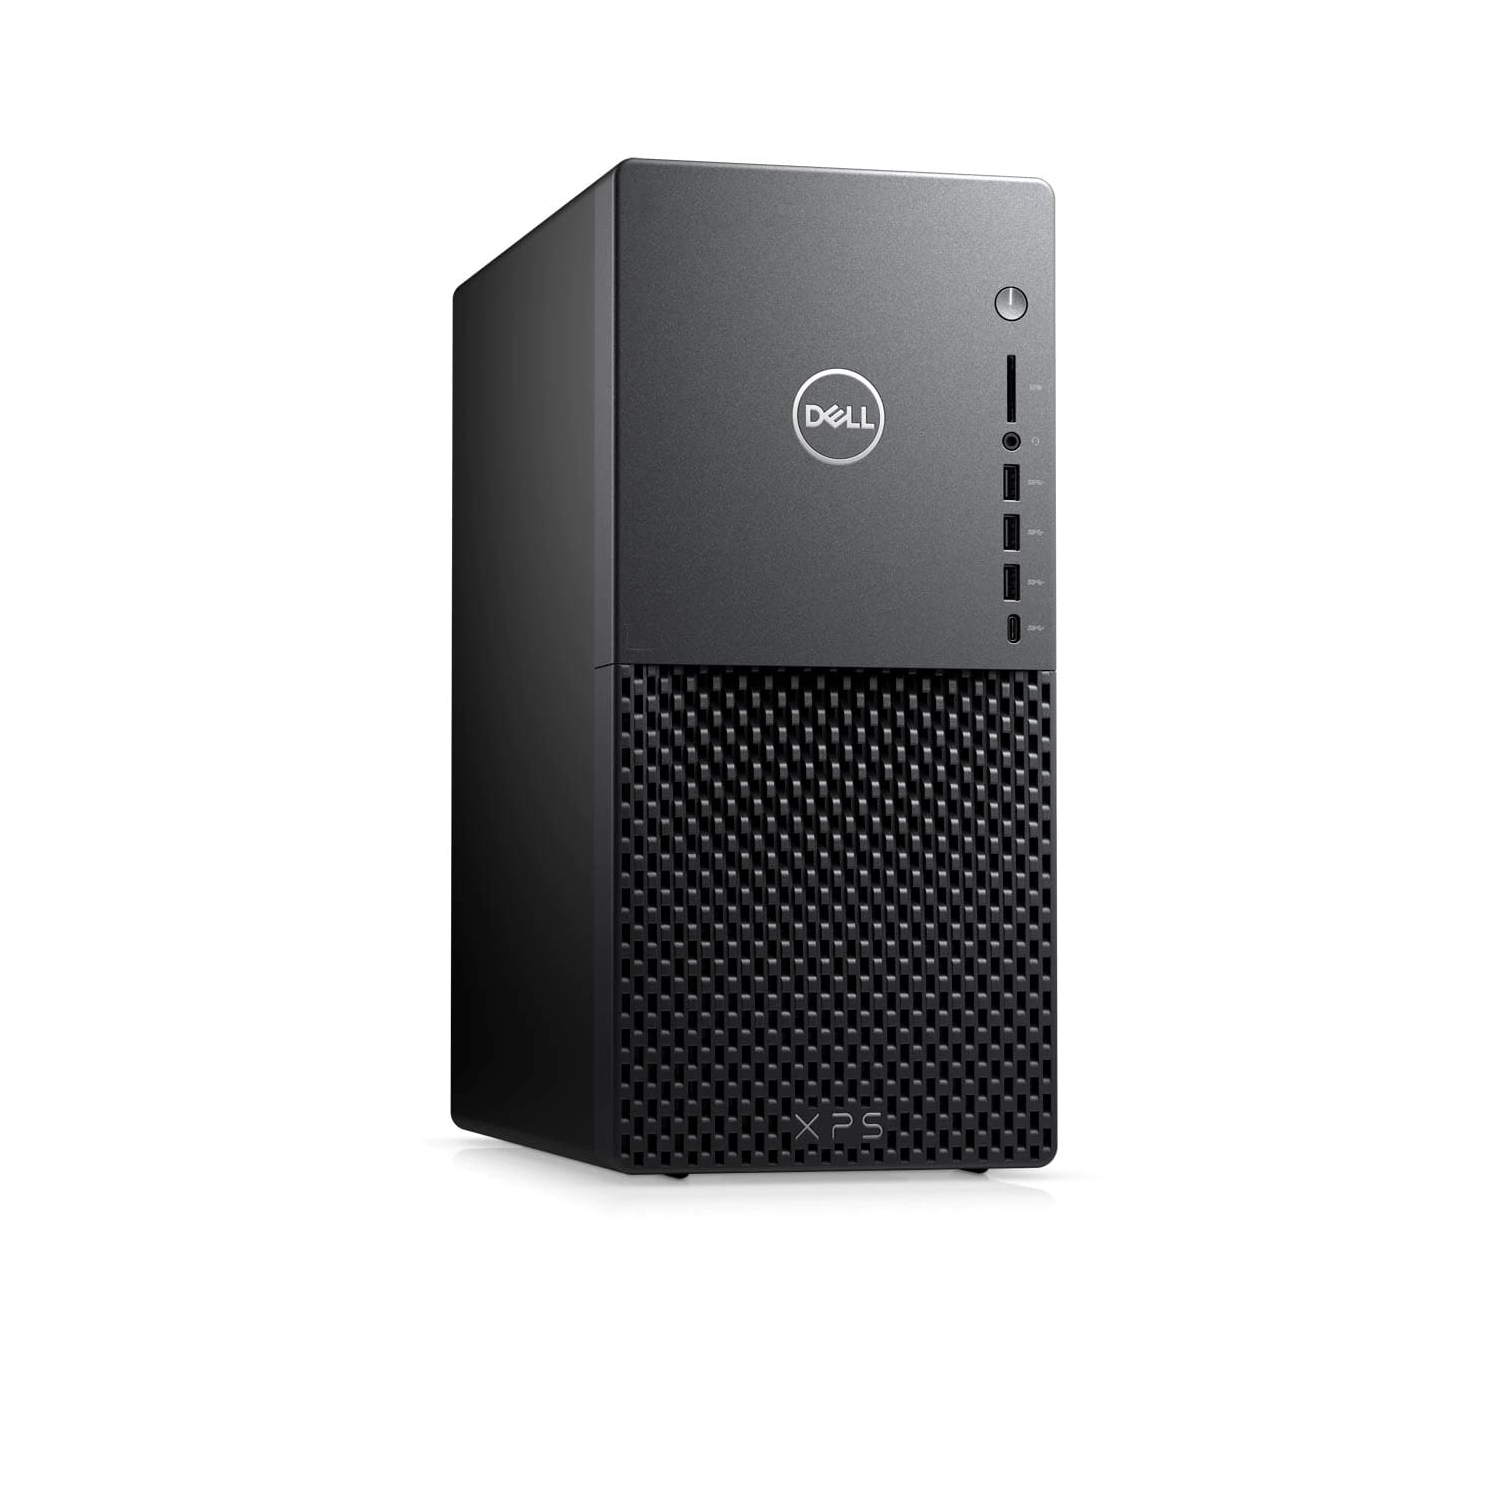 Refurbished (Excellent) - Dell XPS 8940 Desktop (2020) | Core i7 - 1TB SSD - 32GB RAM | 8 Cores @ 4.8 GHz - 10th Gen CPU Certified Refurbished